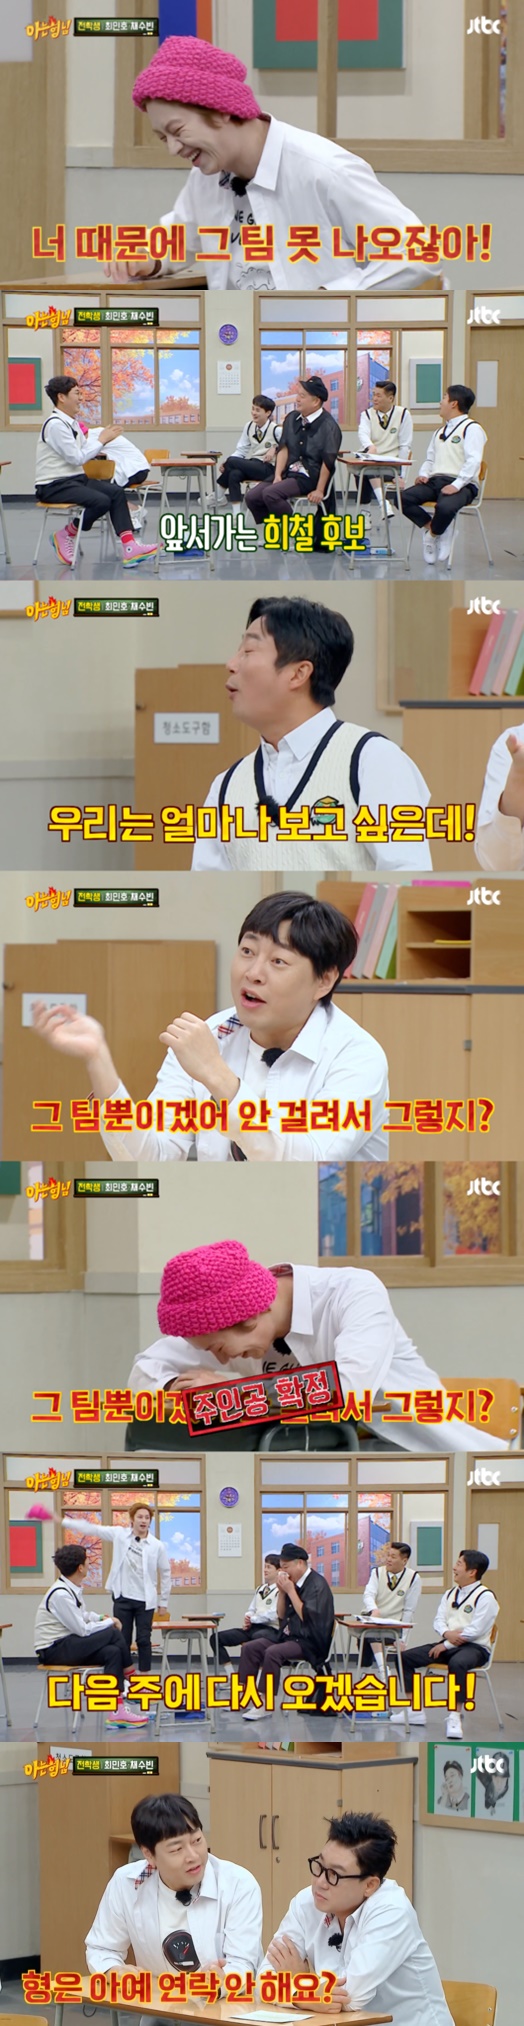 The reason stars are more cautious about dating is that they can tag along even after Breakup, not to mention if the target is a popular idol.Choi Min-ho and Chae Soo-bin of Netflixs new series The Fabulous appeared in JTBC entertainment Knowing Bros, which aired on the 12th.Choi Min-ho said, We are X, but we are separated, but we are close friends. Kang Ho-dong looked at Seo Jang-hoon, saying, I will finally have the main characters remarks.Seo Jang-hoon asked Kim Hee-chul how he was doing, and Kim Hee-chul said, Arent I a supporting role? Lee Soo-geun replied, Because of you, the team can not come here.I want to see how much we want to see, he complained.Kim Hee-chul and TWICE MOMO broke up in July last year after a year and a half of devotion.Lee Jin-ho suspected another devotee, Is not that the only team? Kim Hee-chul, who bowed his head, said, Ill come back next week. Goodbye.In the past, someone laughed and someone was uncomfortable, and related articles were poured out as the current K-pop idol Super Junior Kim Hee-chul and TWICE MOMOs Breakup were mentioned.As a result, the main characters of Knowing Bros were Choi Min-ho and Chae Soo-bin, but Kim Hee-chul - MOMO was more interested in the audience.Lee Jin-ho said to Lee Sang-min, Do not you contact me at all?Lee Sang-min repeatedly looked at Lee Jin-ho and repeated the obvious scene.Knowing Bros, which left the members of TWICE as well as their fans feeling uncomfortable and uncomfortable. Of course, some responded that it is not too much, but it is too sensitive and entertainment is entertainment.However, Knowing Bros changed only the performers every time, and there were similar puns and jokes such as Seo Jang-hoon Lee Sang-mins divorce mention, love story Disclosure,Lee Jin-ho joined the youngest to transfuse new blood for the 300th anniversary last year, and the crew expected a fresh wind to come, but unfortunately the reversal did not happen.Old gags, personal listings, talk by Disclosure, etc., have not changed and still remain in the past.Entertainment, which has already become popular, rarely tries to make big changes. It tries to maintain through modification and supplementation.However, the production crew must be painfully aware that Knowing Bros, which had been doing well, has not been able to halve viewer ratings and run out of topics from a certain moment. It seems necessary to revise, supplement, and take the next step.Knowing Bros broadcast screen capture